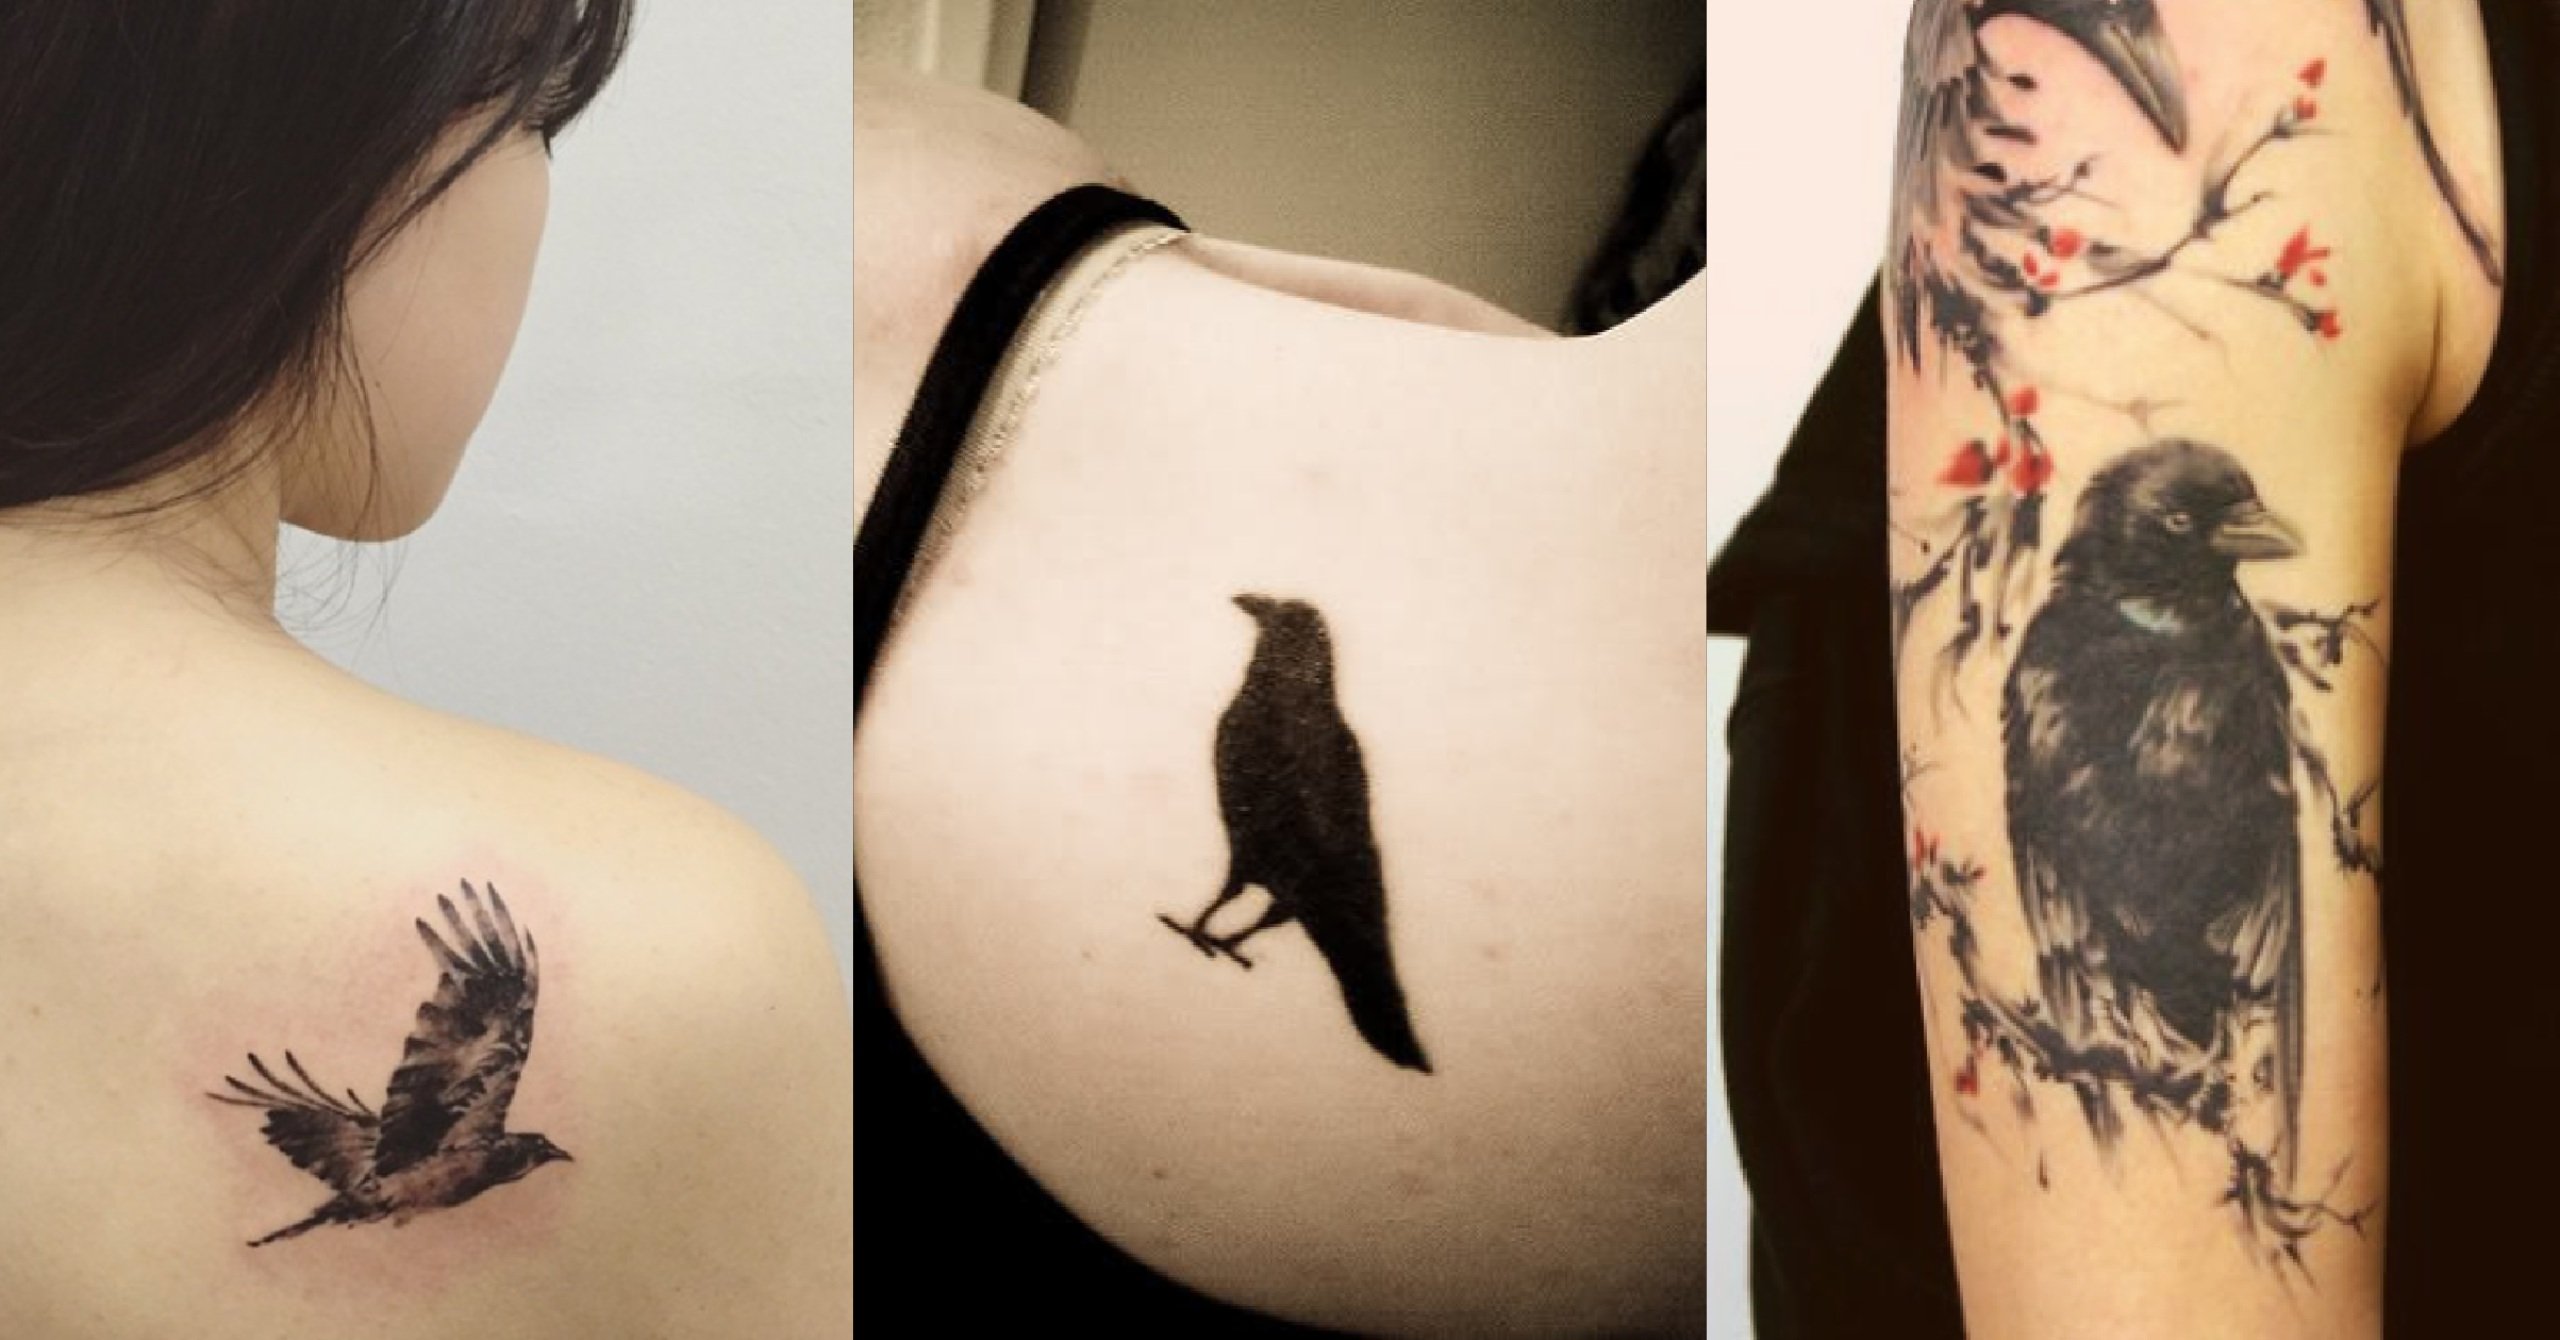 14 Crow Tattoo Designs That Will Inspire You To Be True To Yourself